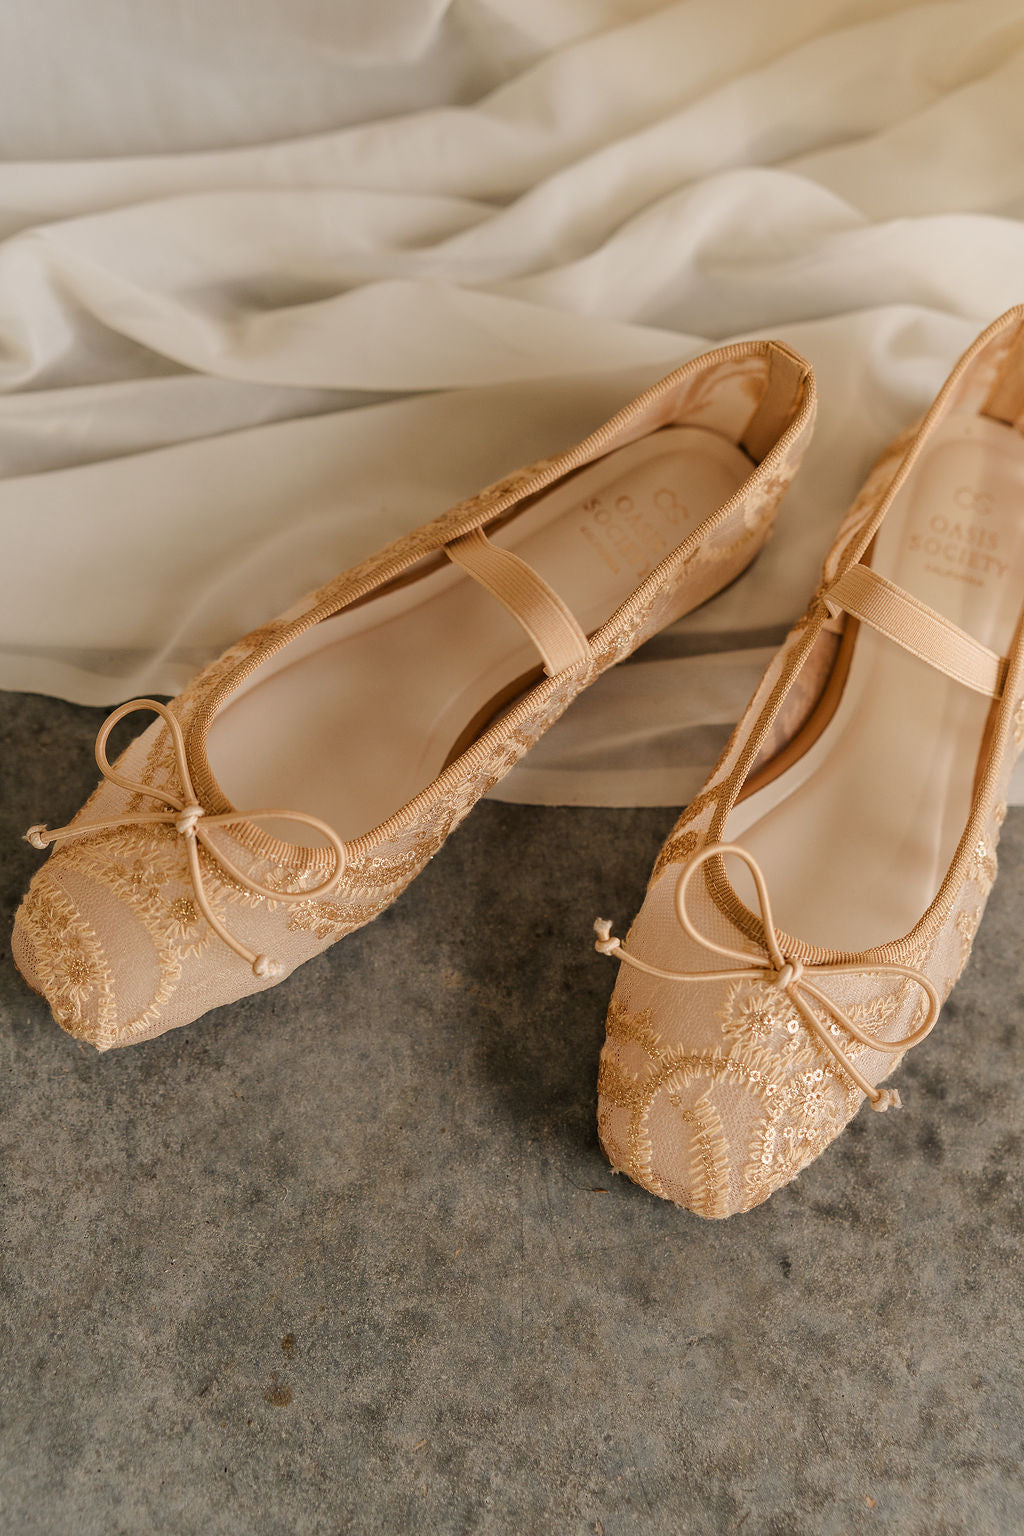 Top view of the Bisbee Ballet Flat in Gold that have beige mesh, ivory embroidery, gold sequins, a bow on front, and an elastic strap across the foot.